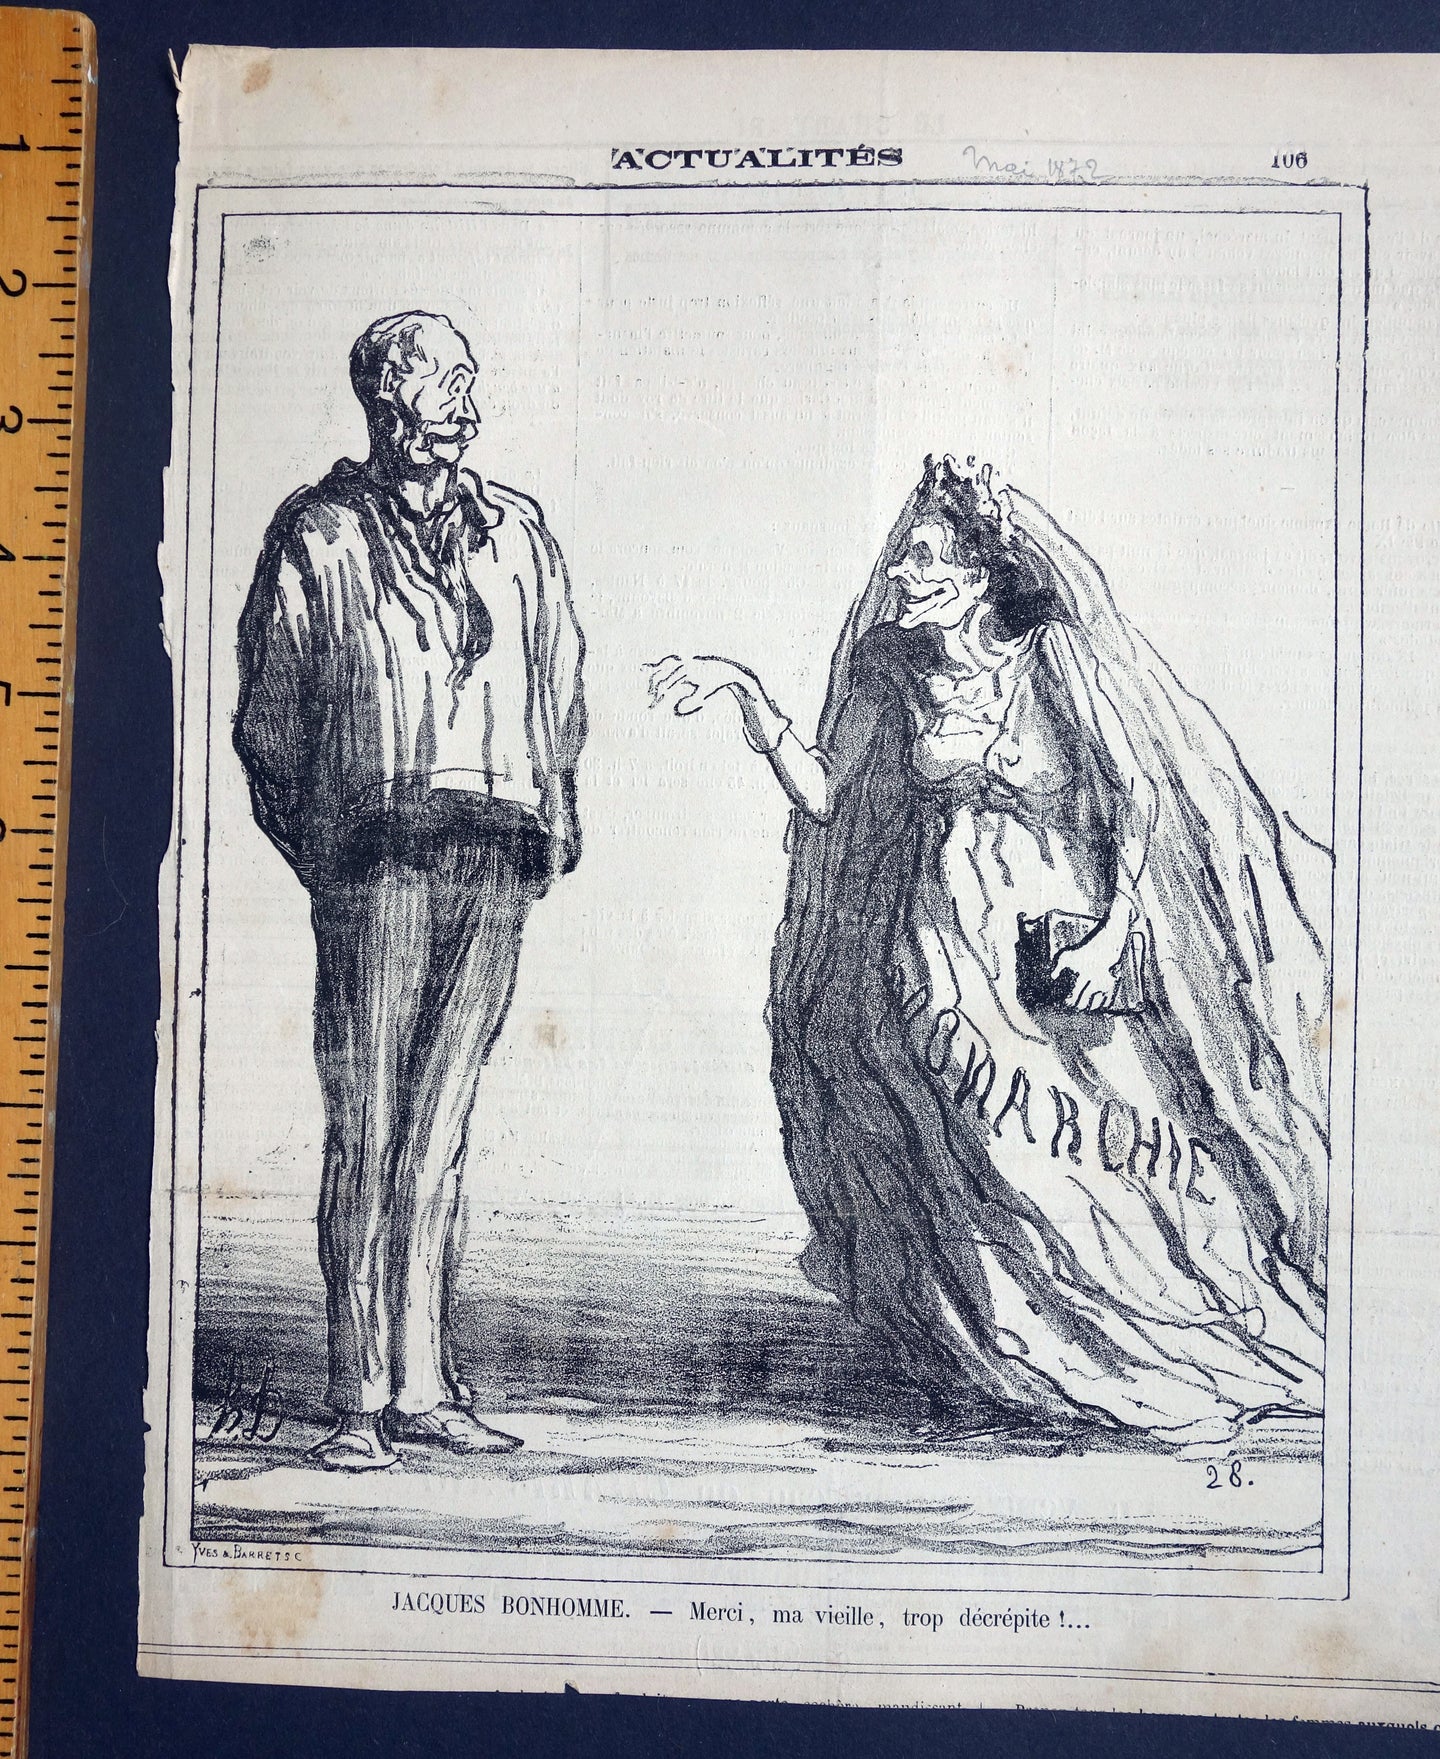 Daumier lithograph Sorry, madam , but you are really too decrepit!from ‘Actualites’